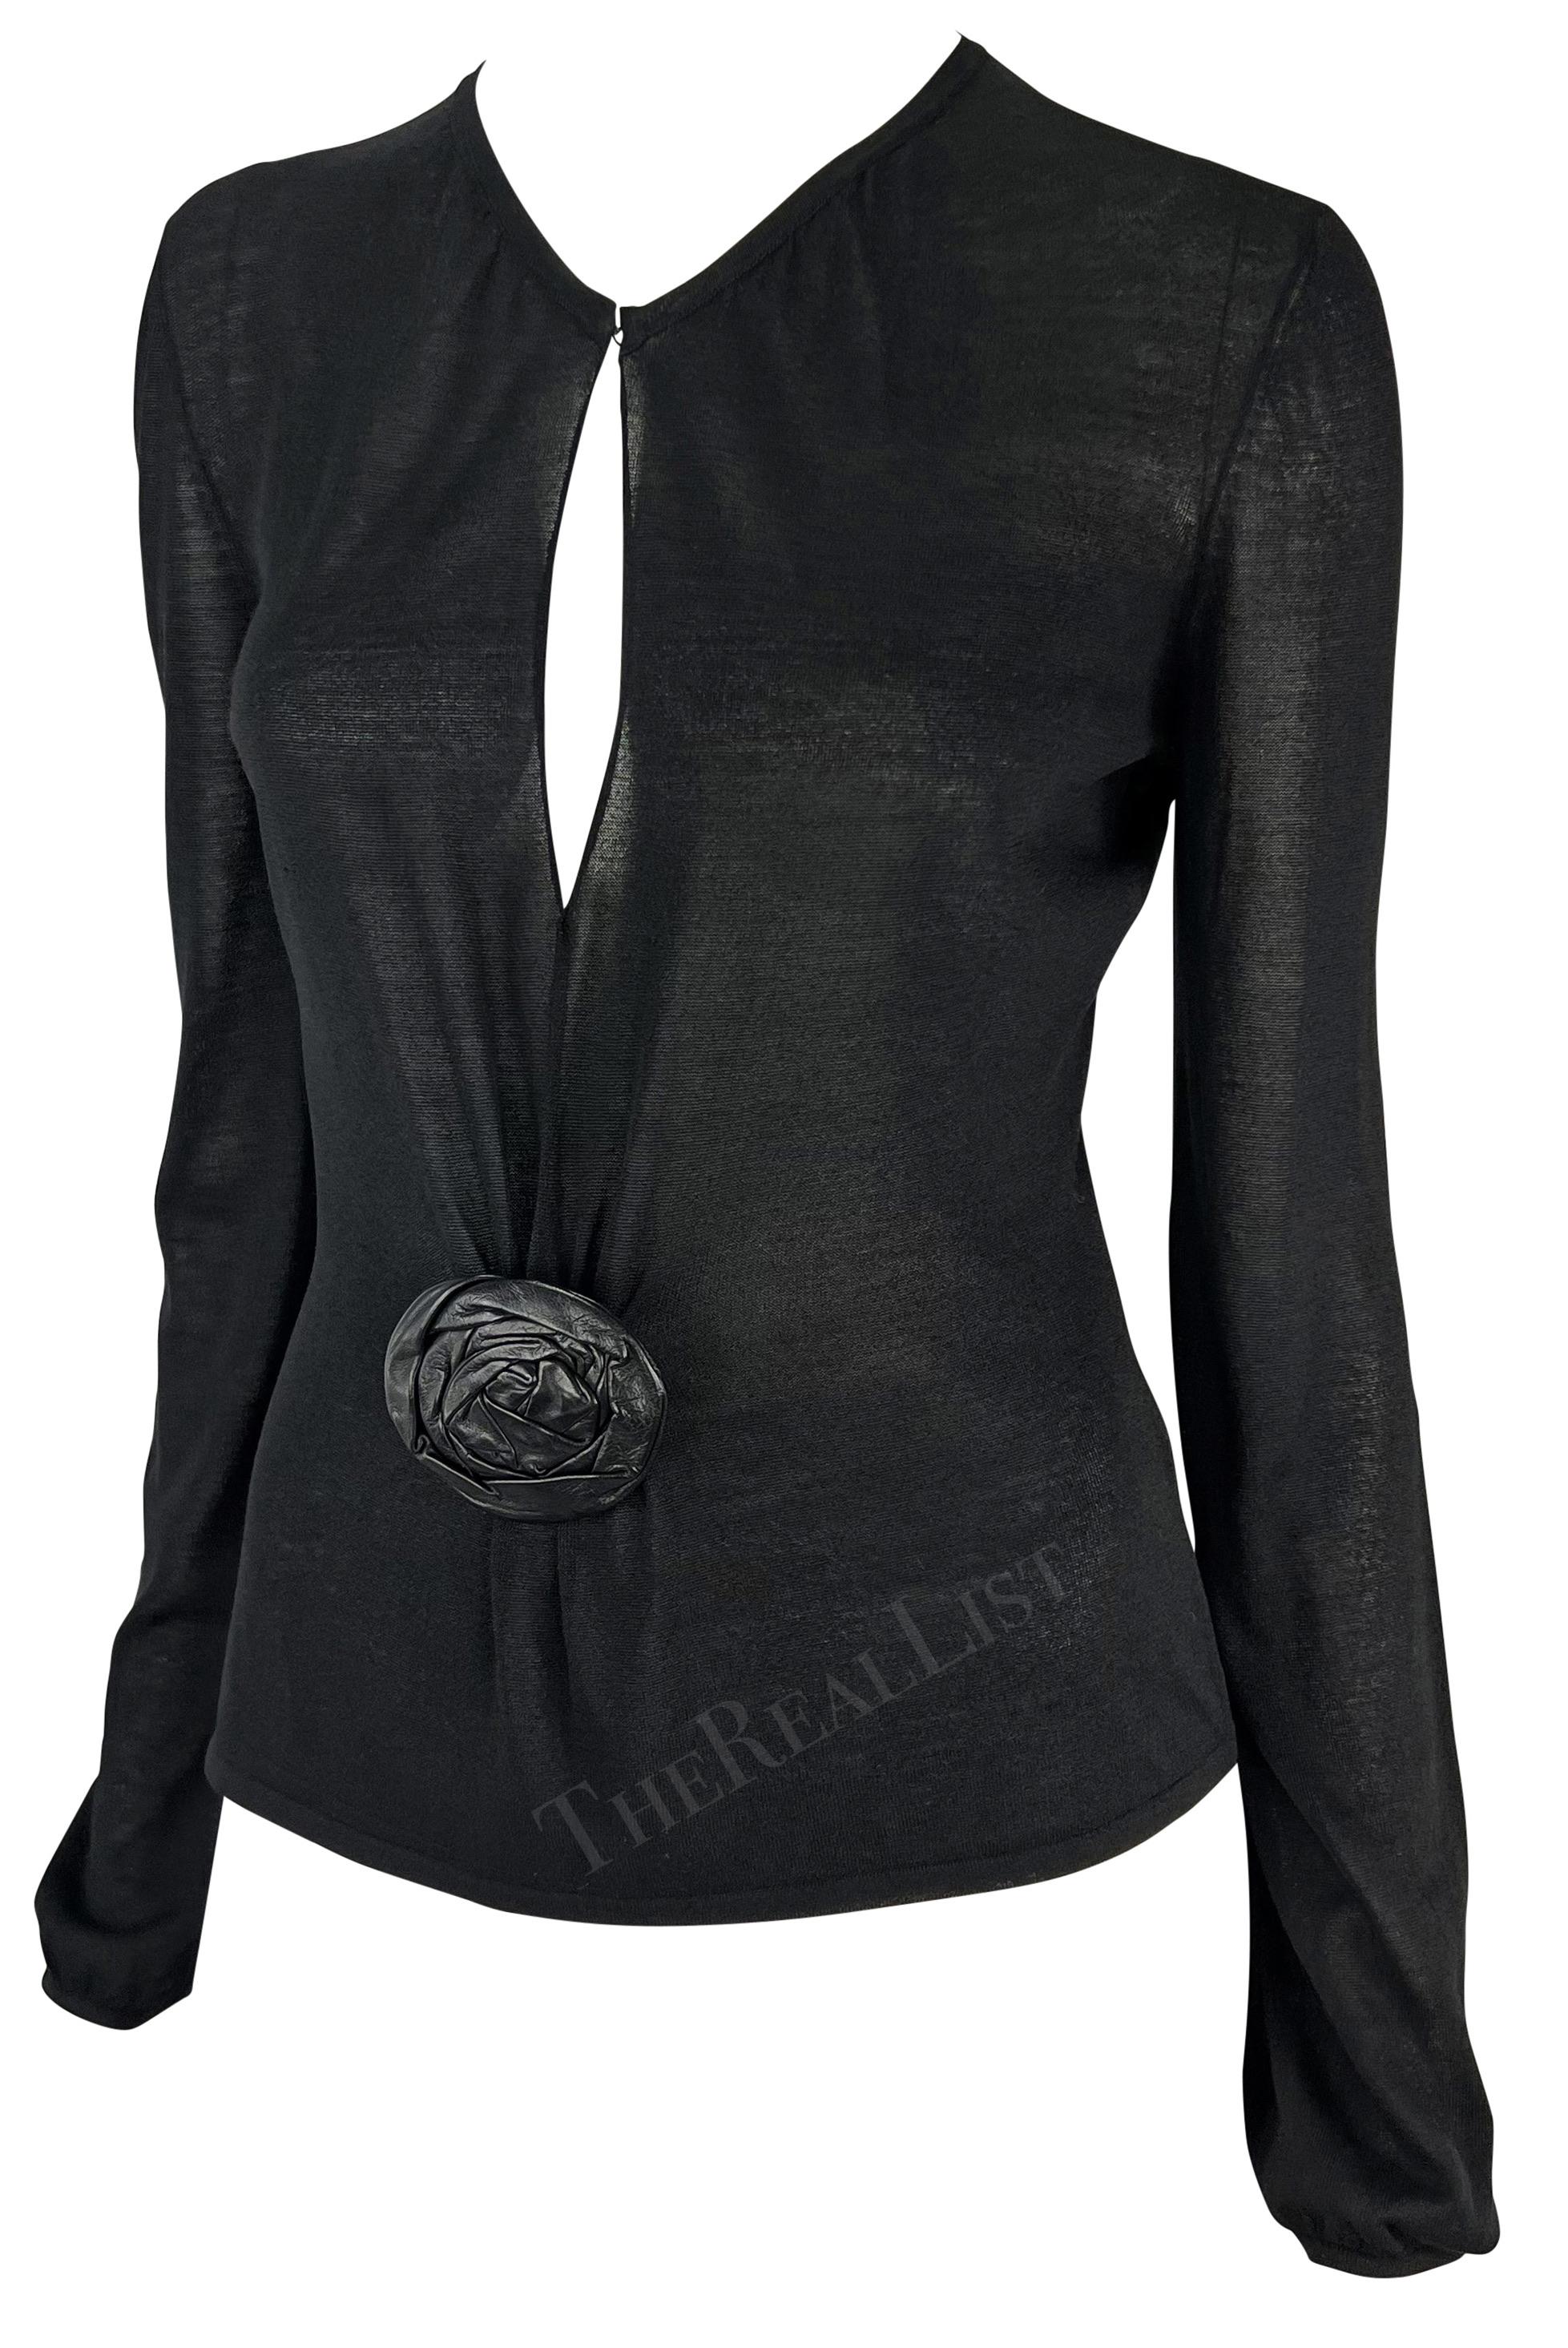 F/W 1999 Gucci by Tom Ford Runway Black Leather Flower Plunge Sheer Knit Top For Sale 2